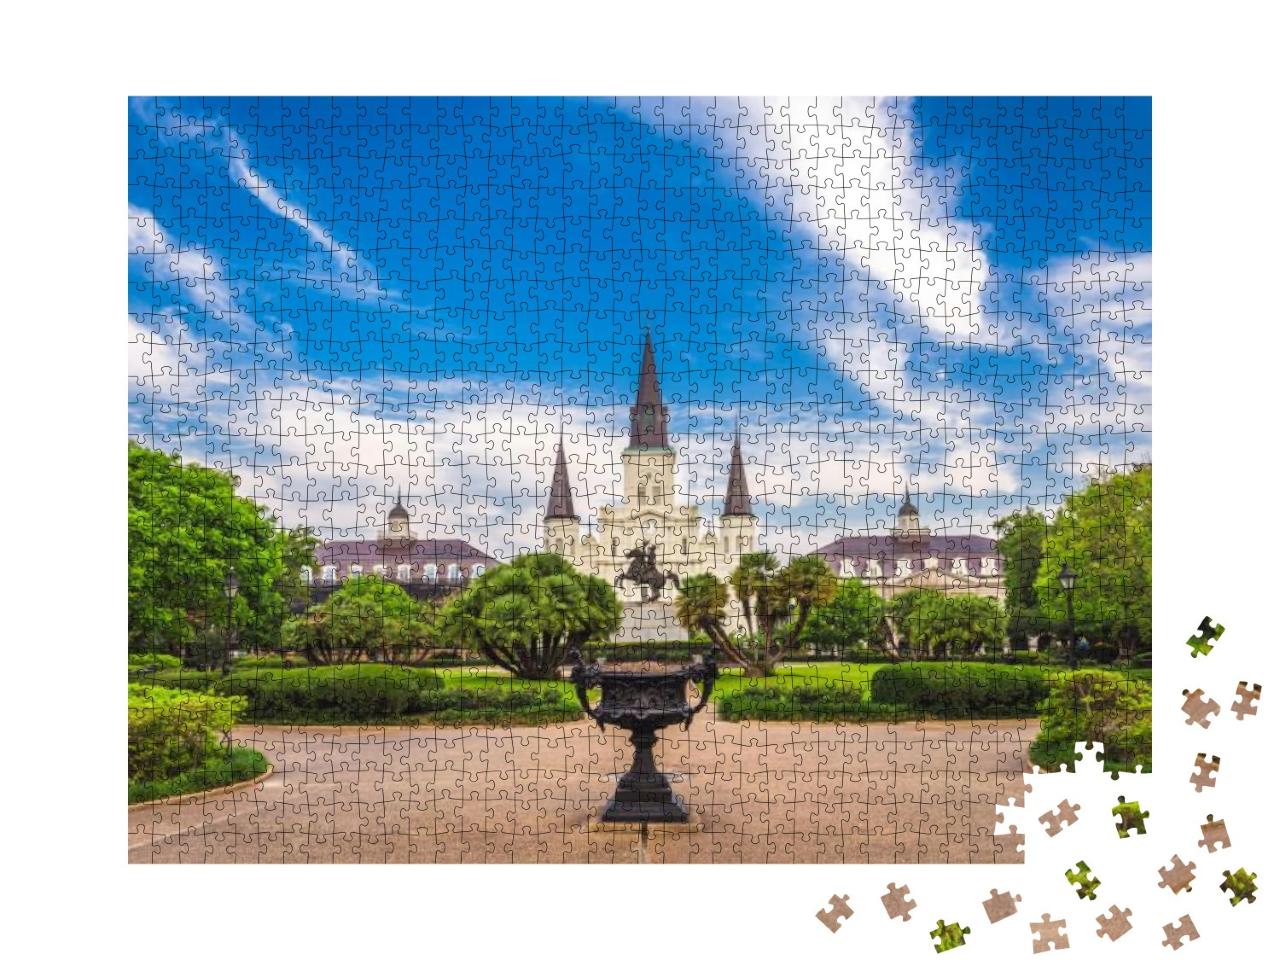 New Orleans, Louisiana, USA At Jackson Square & St. Louis... Jigsaw Puzzle with 1000 pieces